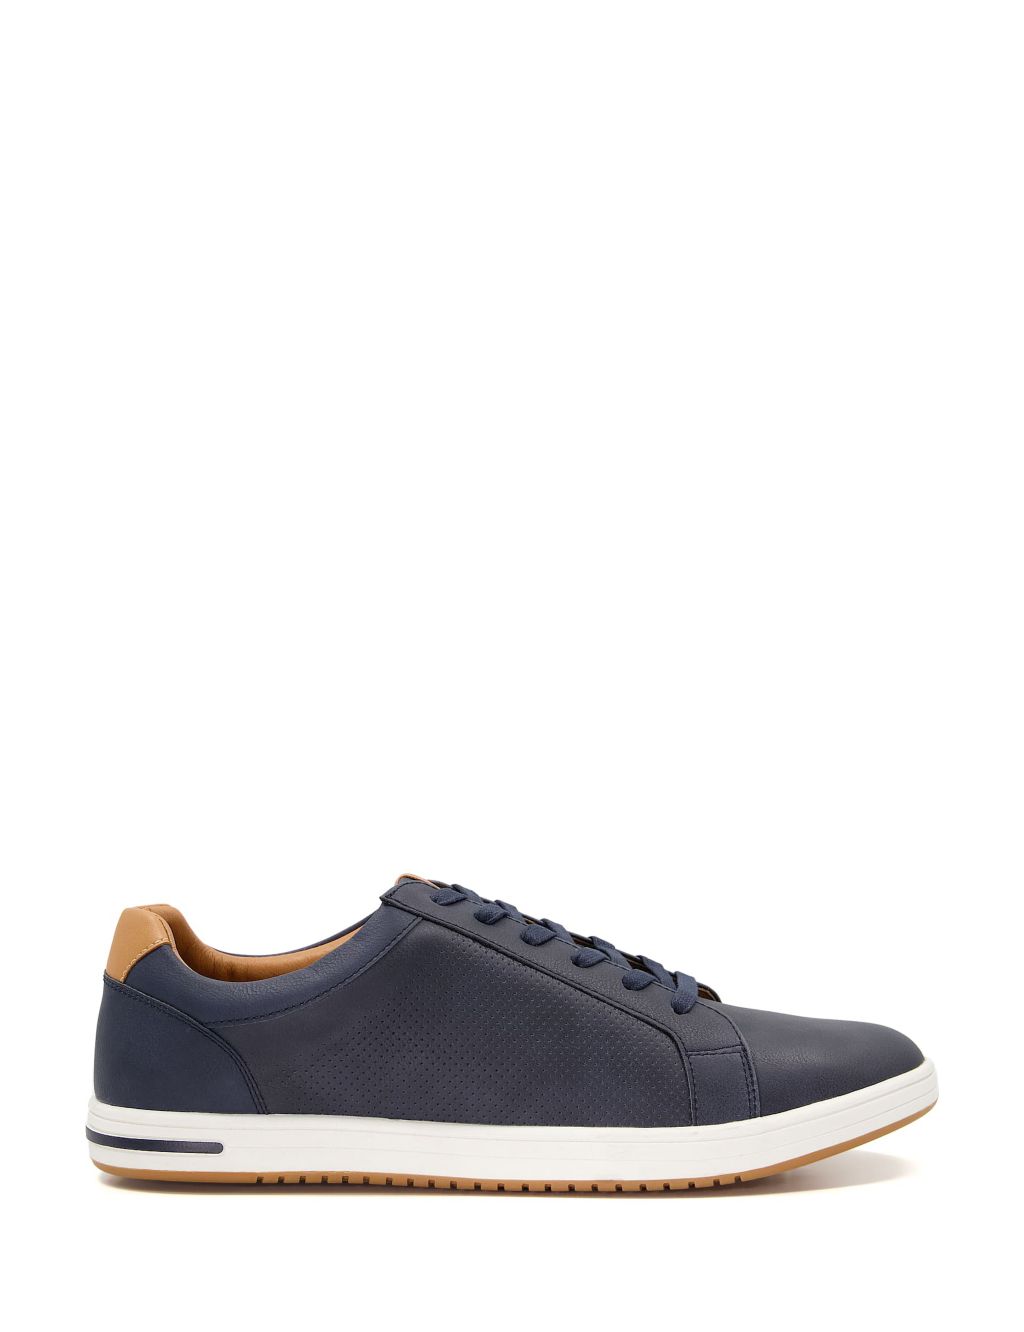 Suedette Lace Up Trainers image 1